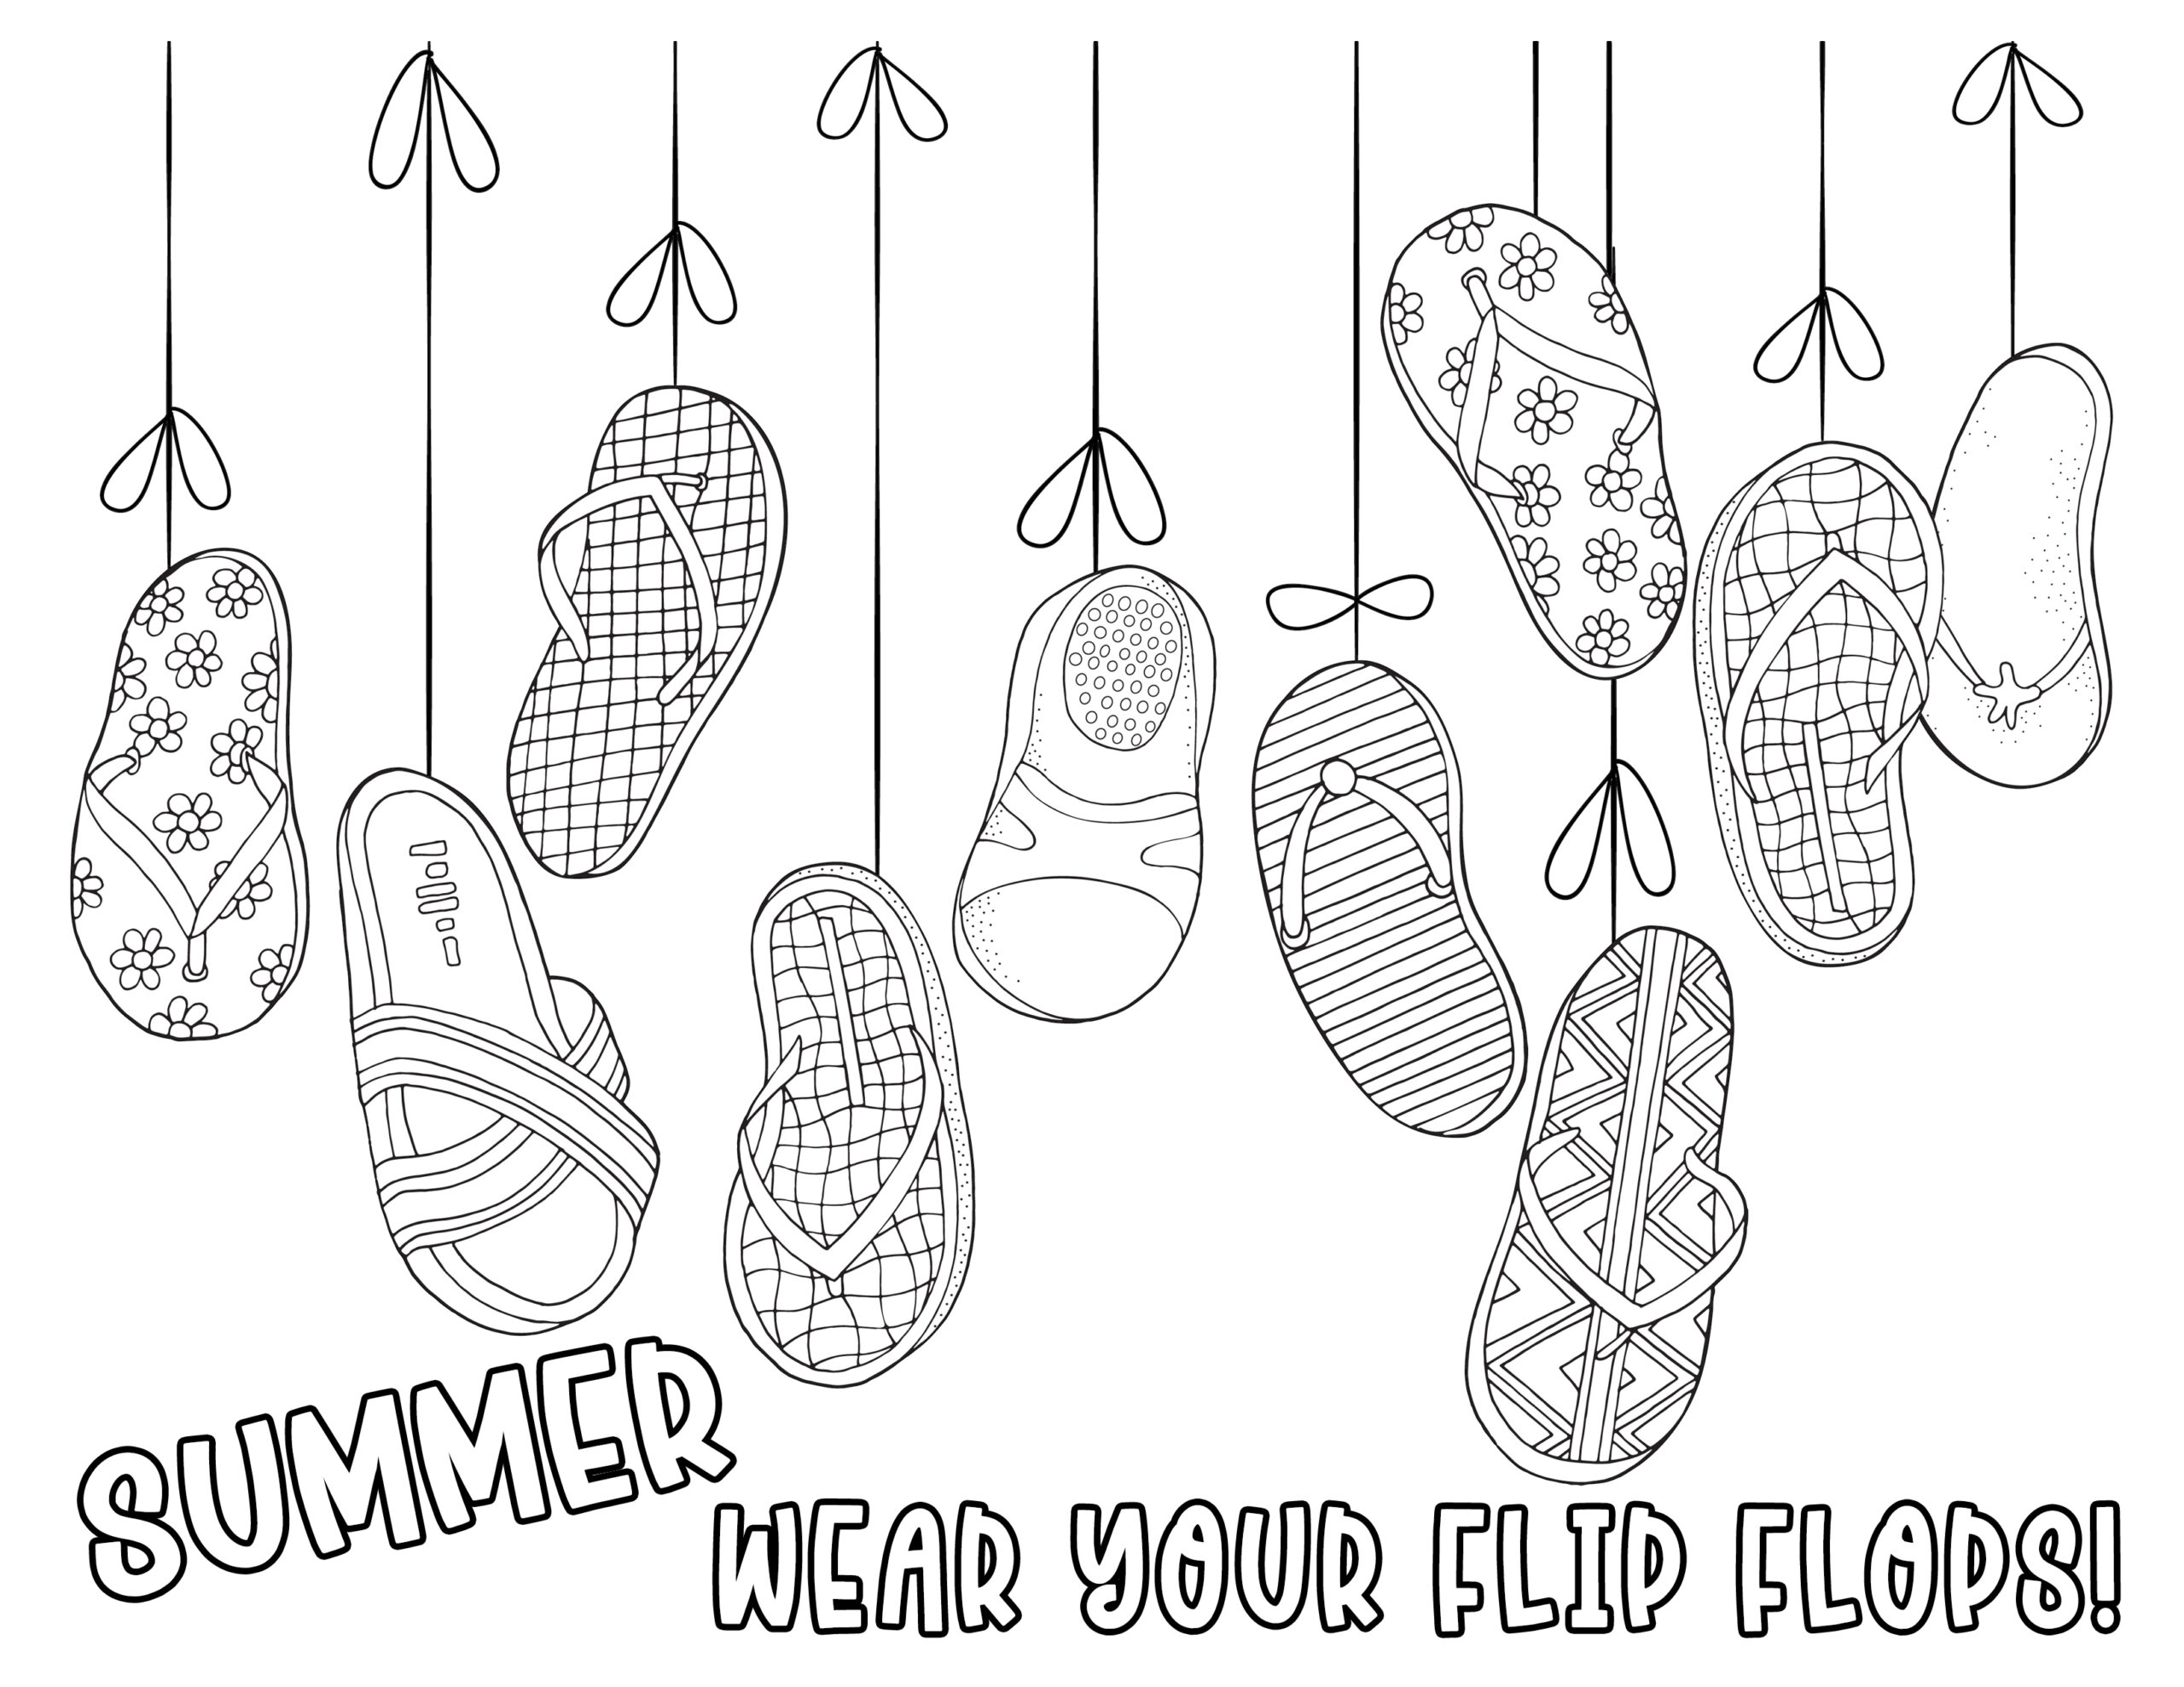 Favorite Pastimes Coloring Pages... Summer Fun! - inkhappi